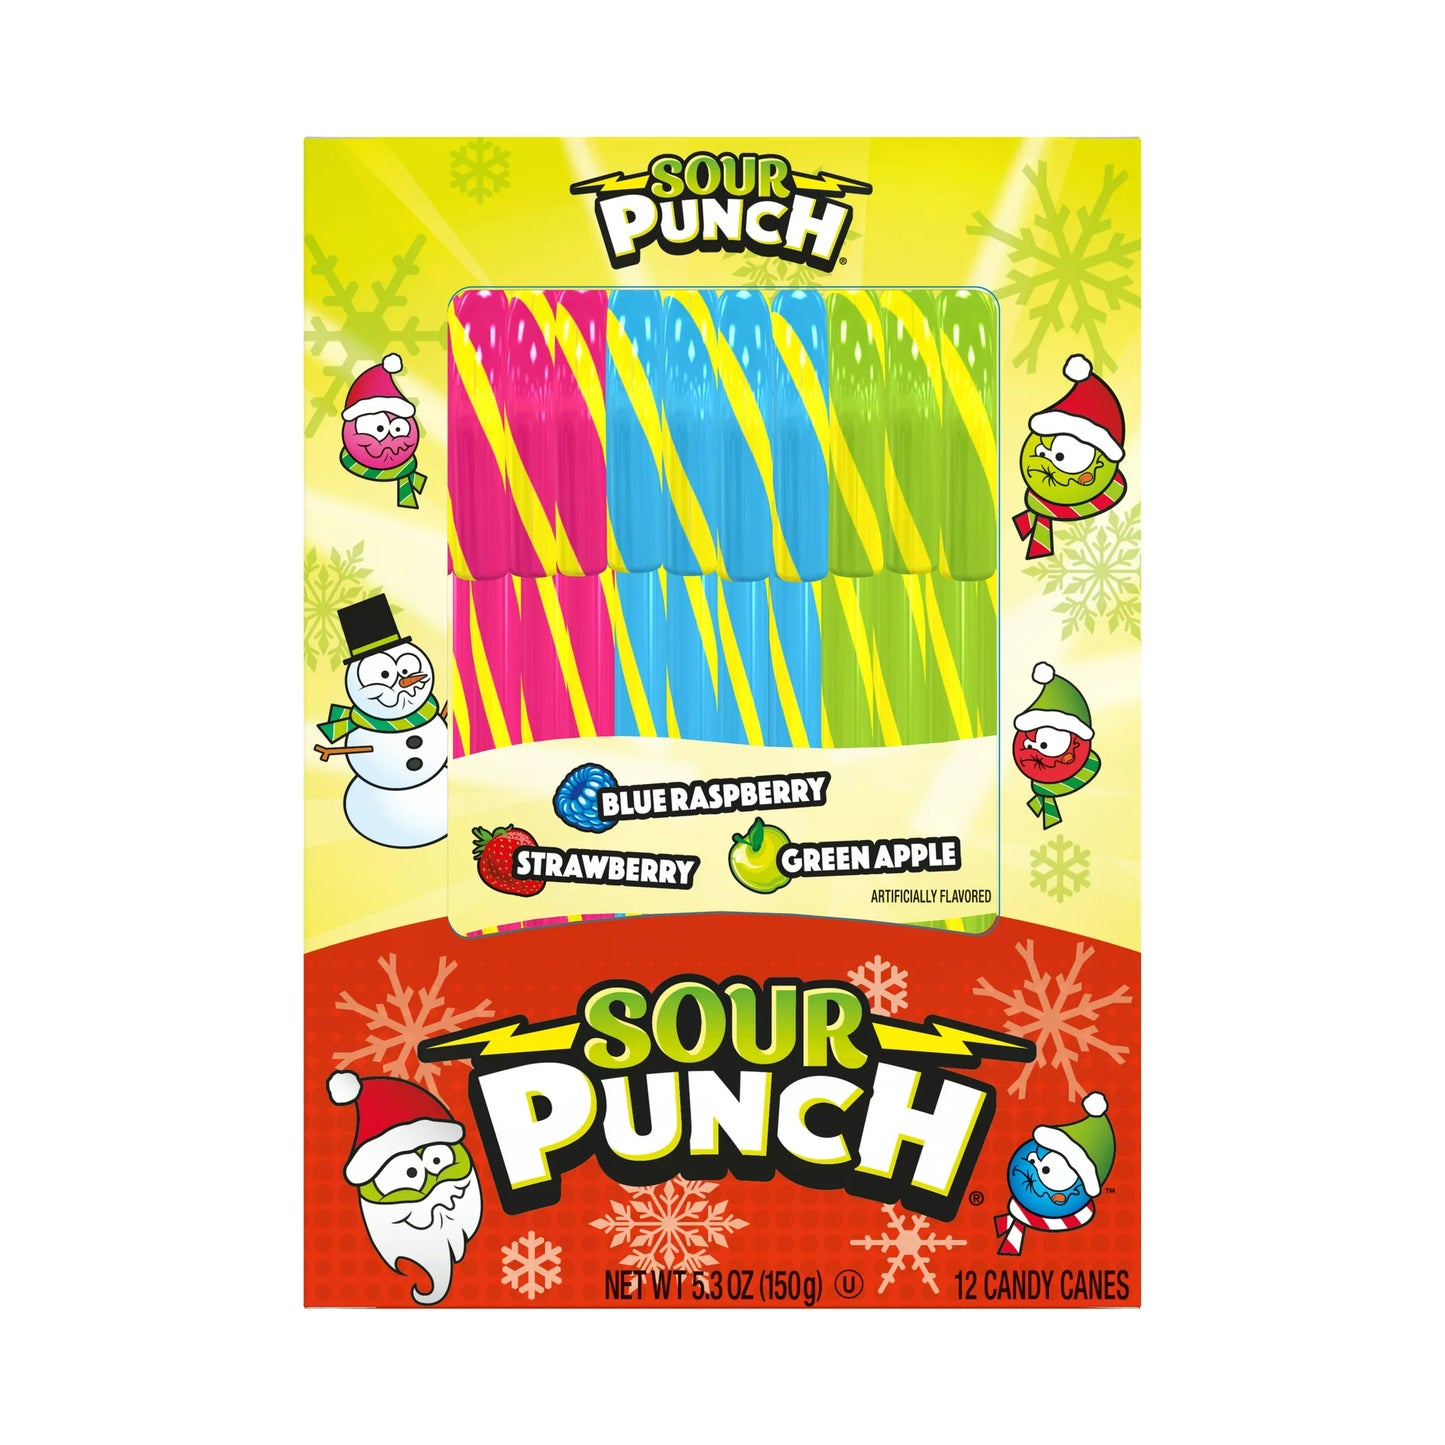 Sour Punch Assorted Flavors Candy Canes, 5.3 oz, 12 Count